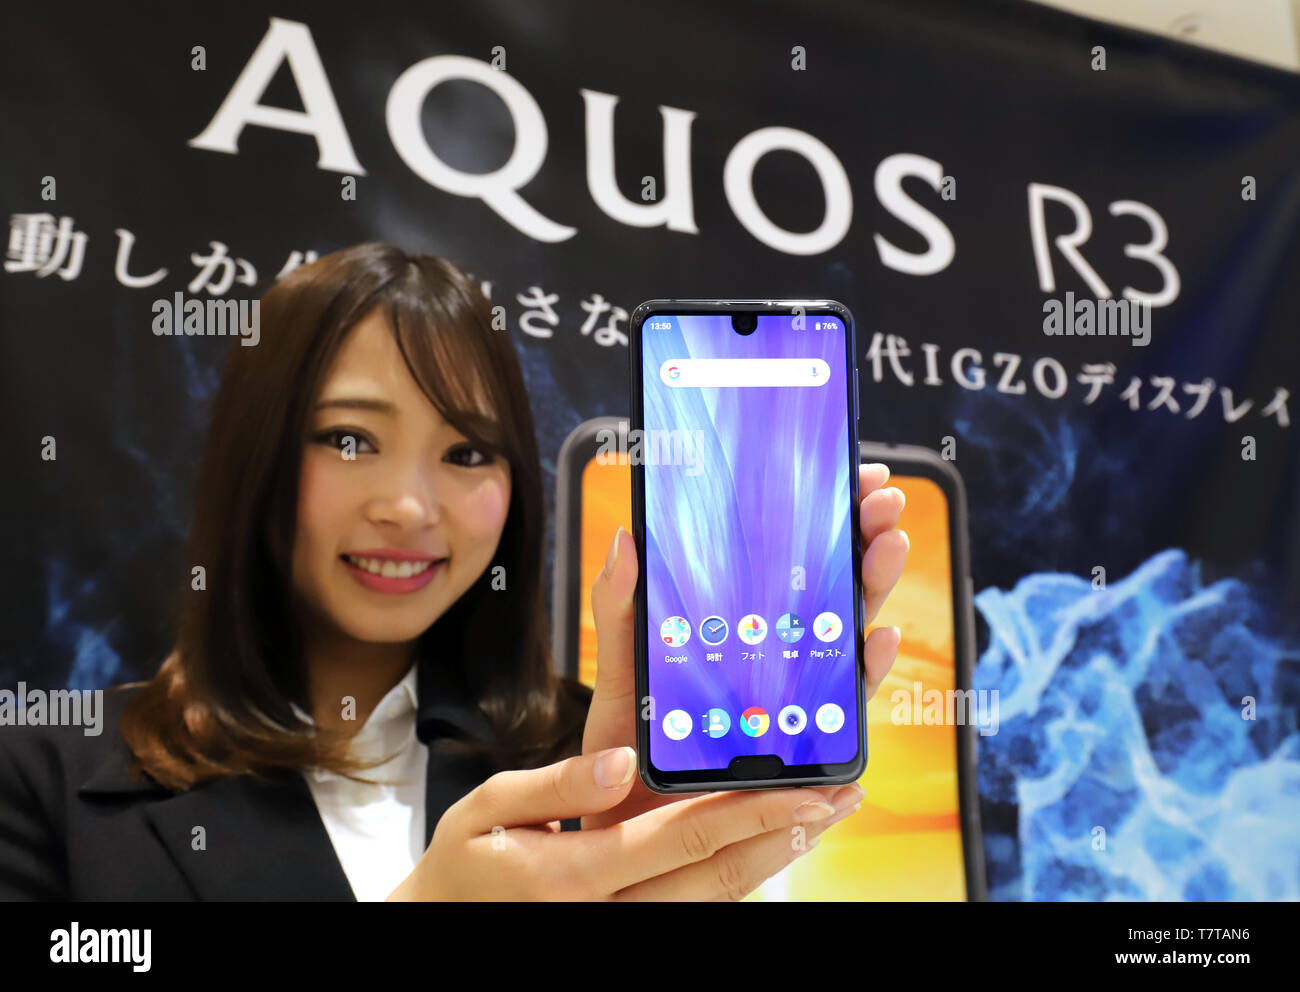 Tokyo, Japan. 8th May, 2019. Japanese electronics giant Sharp employee displays the company's new smart phone 'AQUOS R3' which will go on sale this summer at the company's Tokyo office on Wednesday, May 8, 2019. The new AQUOS smart phone has newly developed 6.2-inch sized IGZO LCD on its display which can reproduce 1 billion color images. Credit: Yoshio Tsunoda/AFLO/Alamy Live News Stock Photo